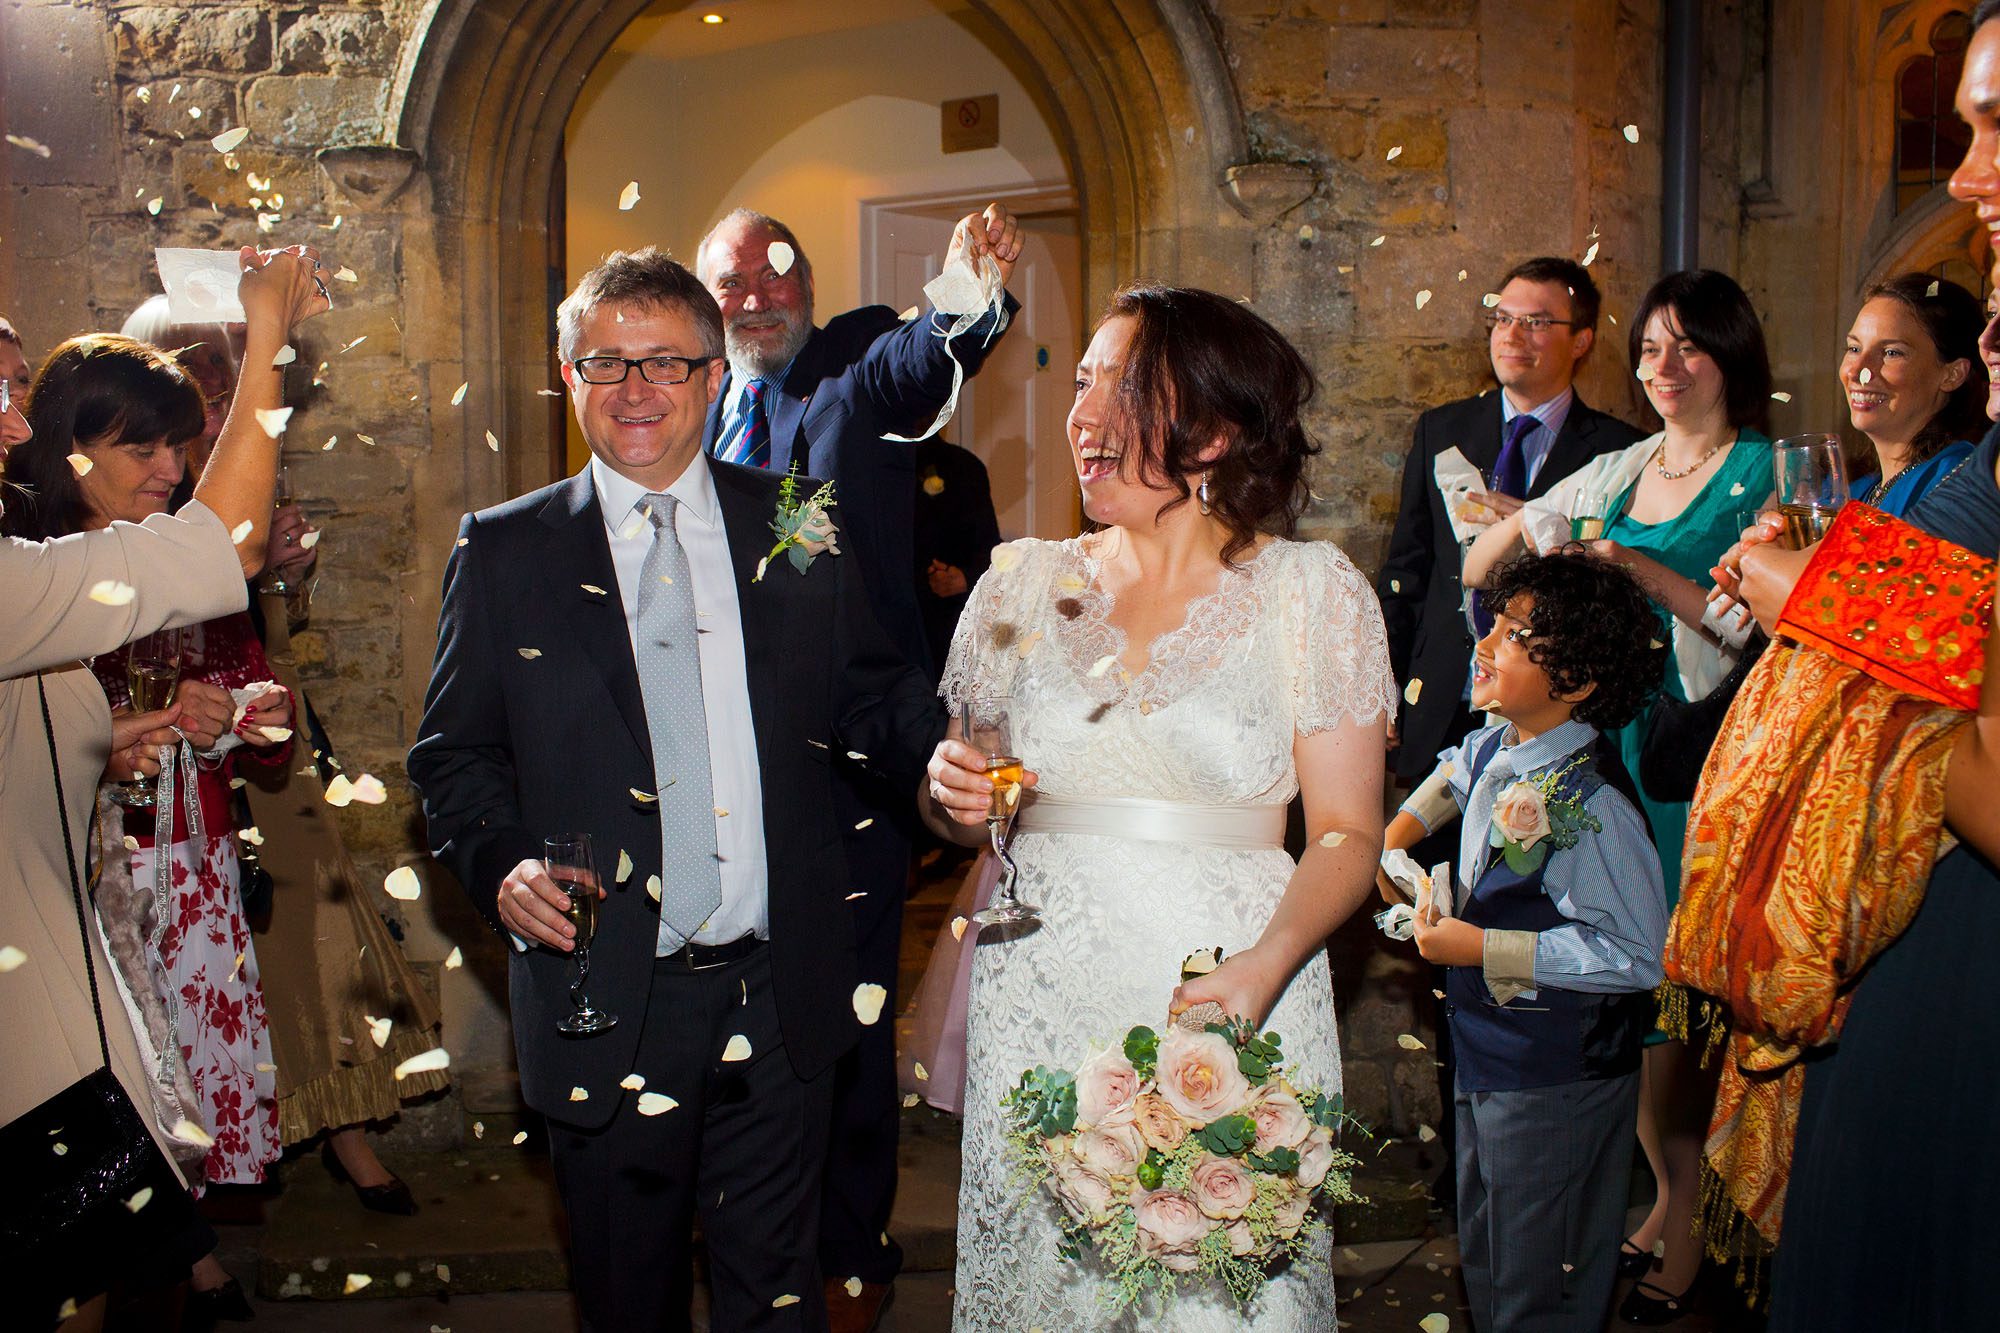 Notley Abbey wedding of Lucy and John